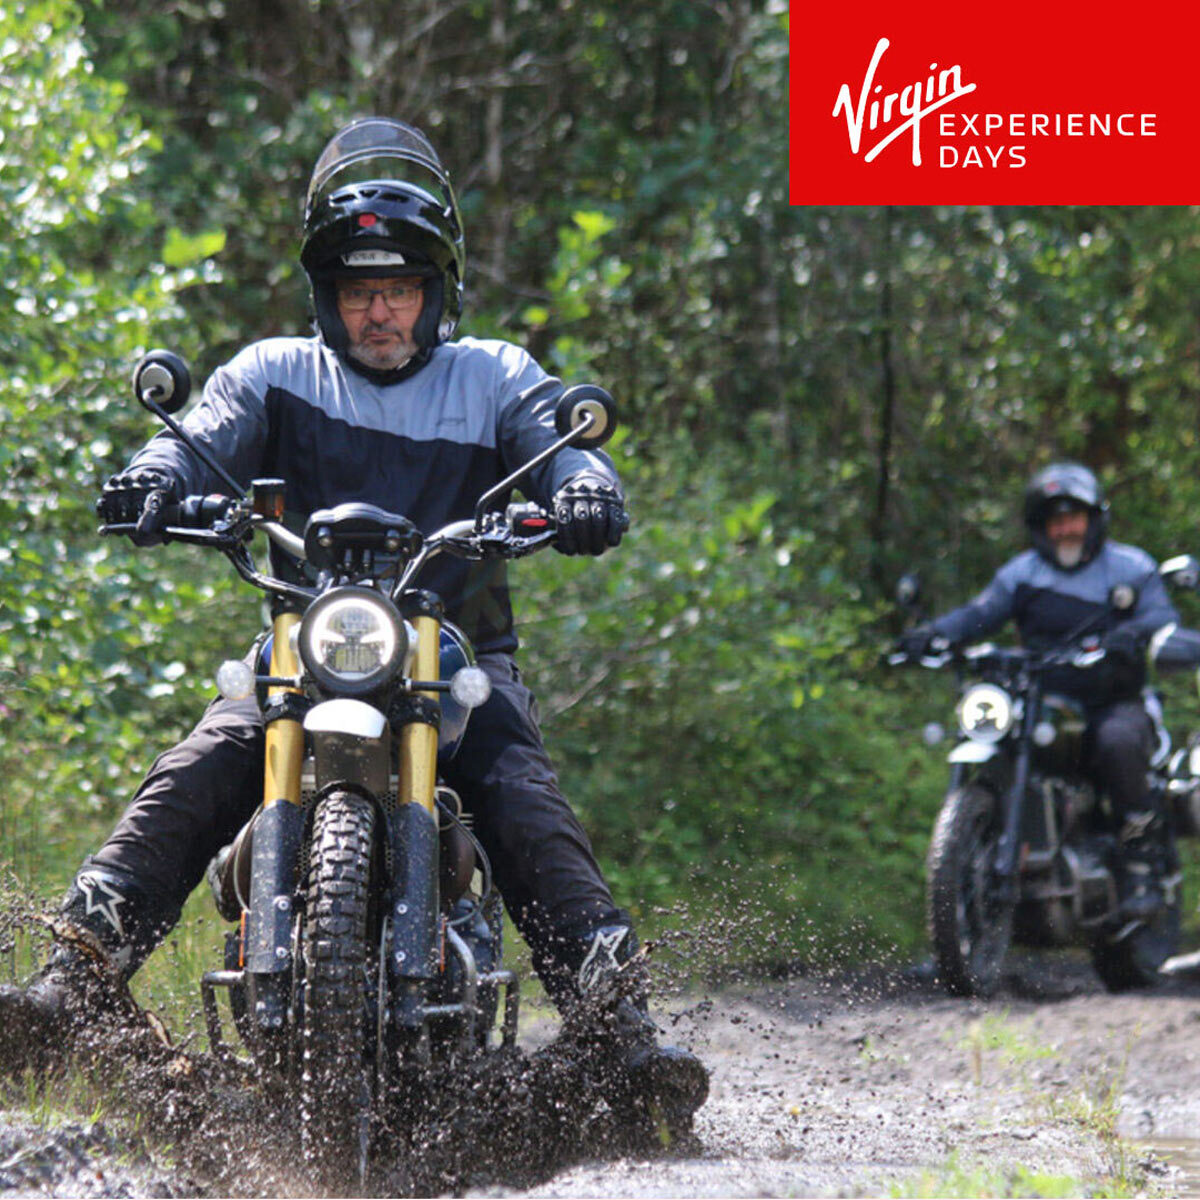 Buy Virgin Experience Full Day Scrambler Motorcycle Experience Image3 at Costco.co.uk